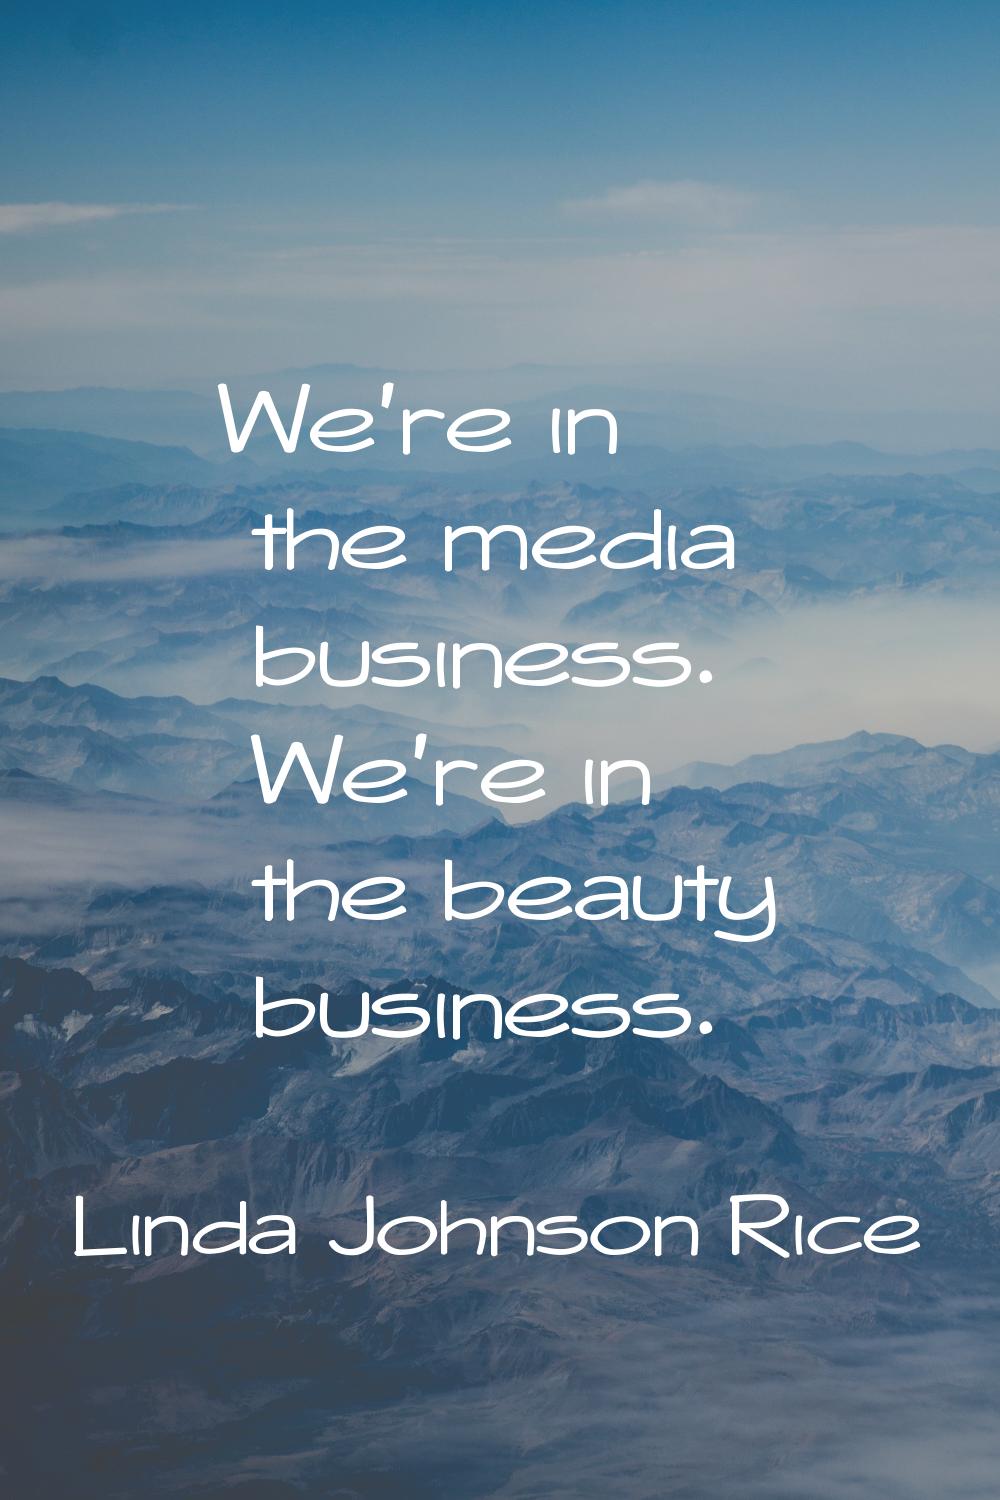 We're in the media business. We're in the beauty business.